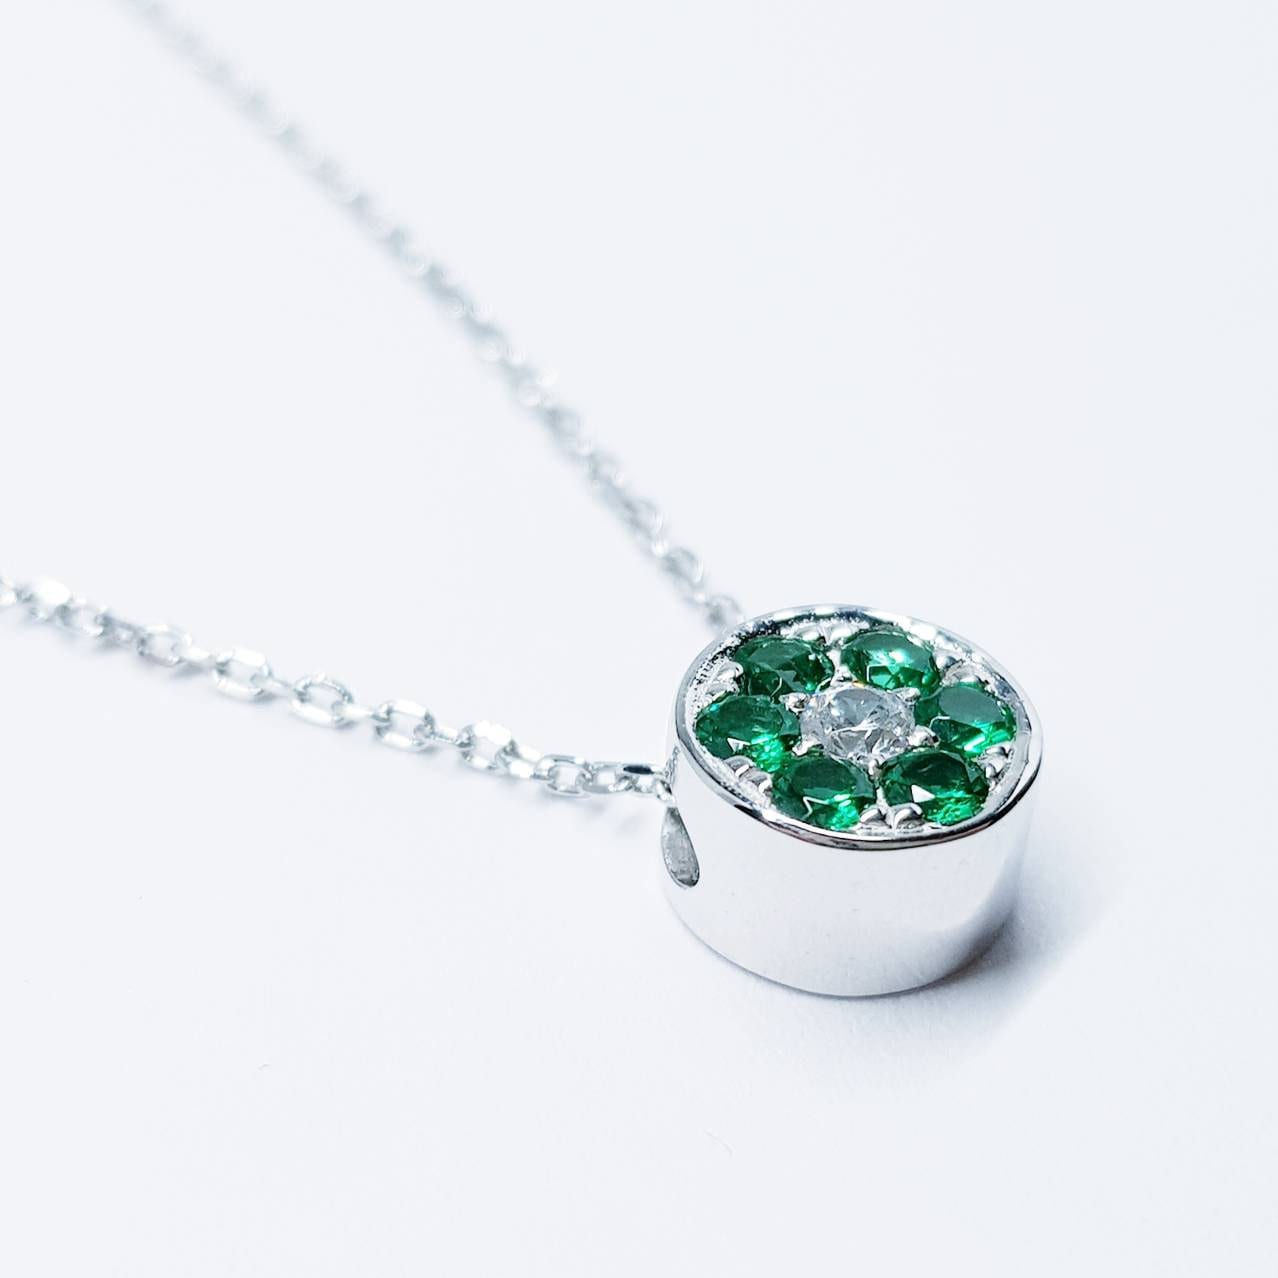 Dainty sterling silver floating green necklace, small round pendant